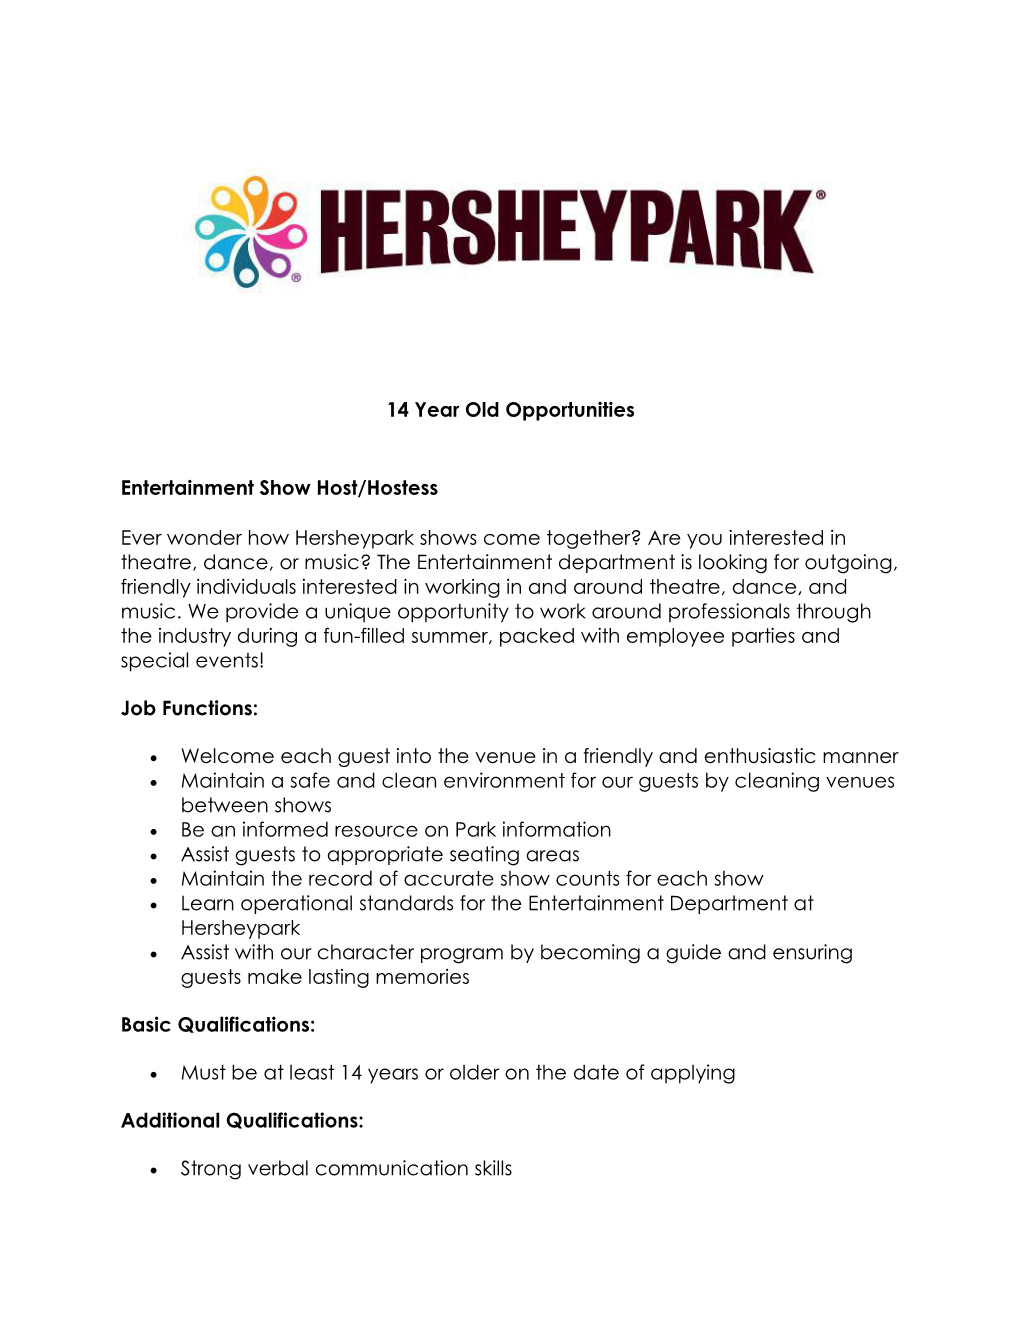 14 Year Old Opportunities Entertainment Show Host/Hostess Ever Wonder How Hersheypark Shows Come Together?